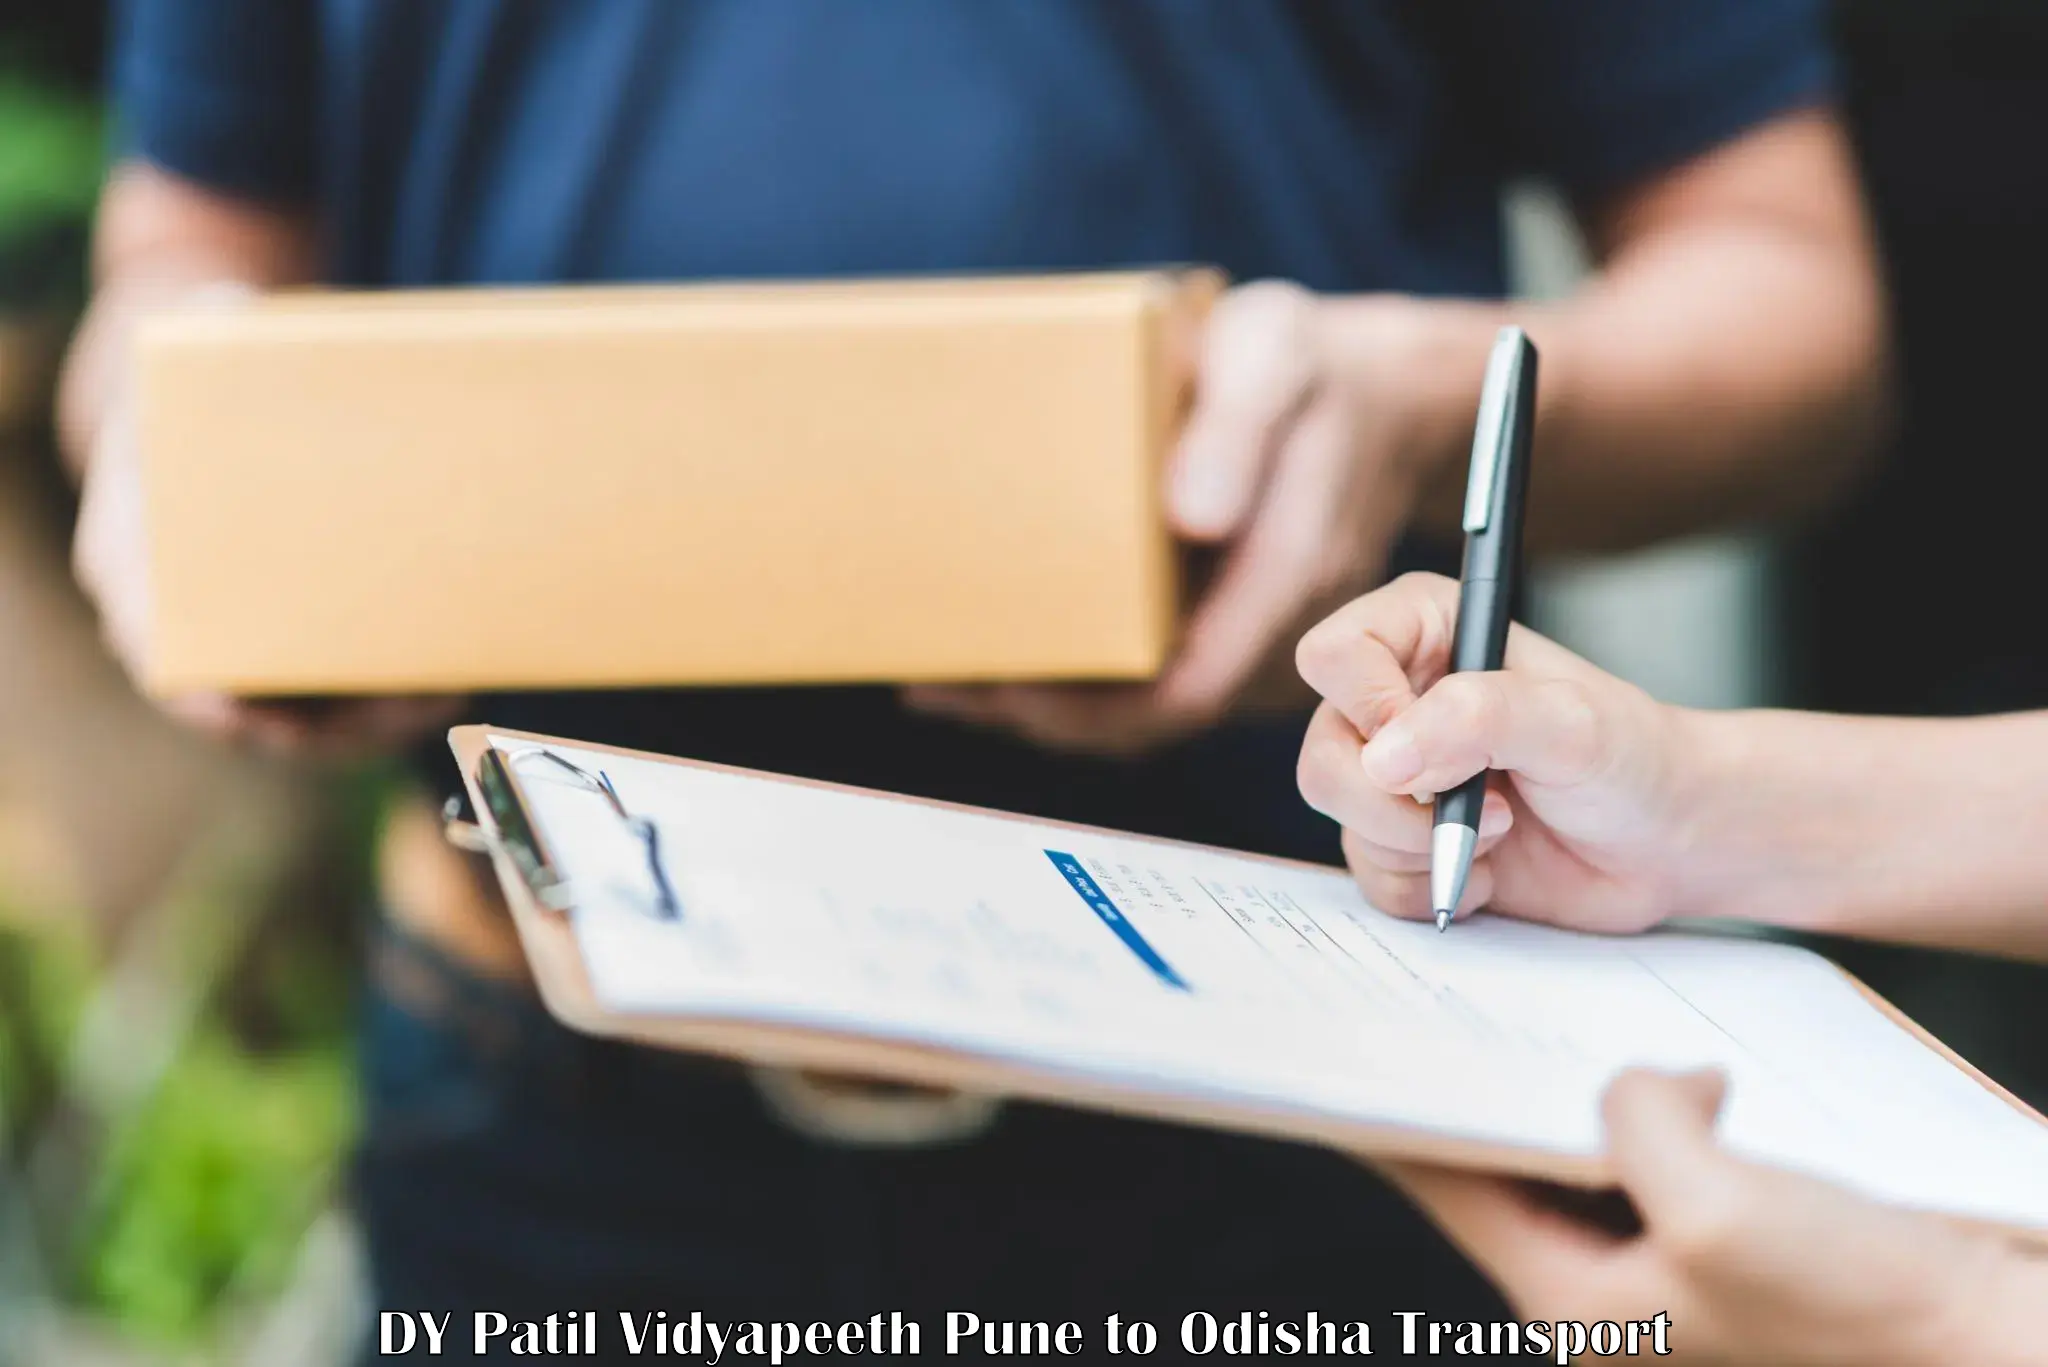 Two wheeler transport services in DY Patil Vidyapeeth Pune to Telkoi